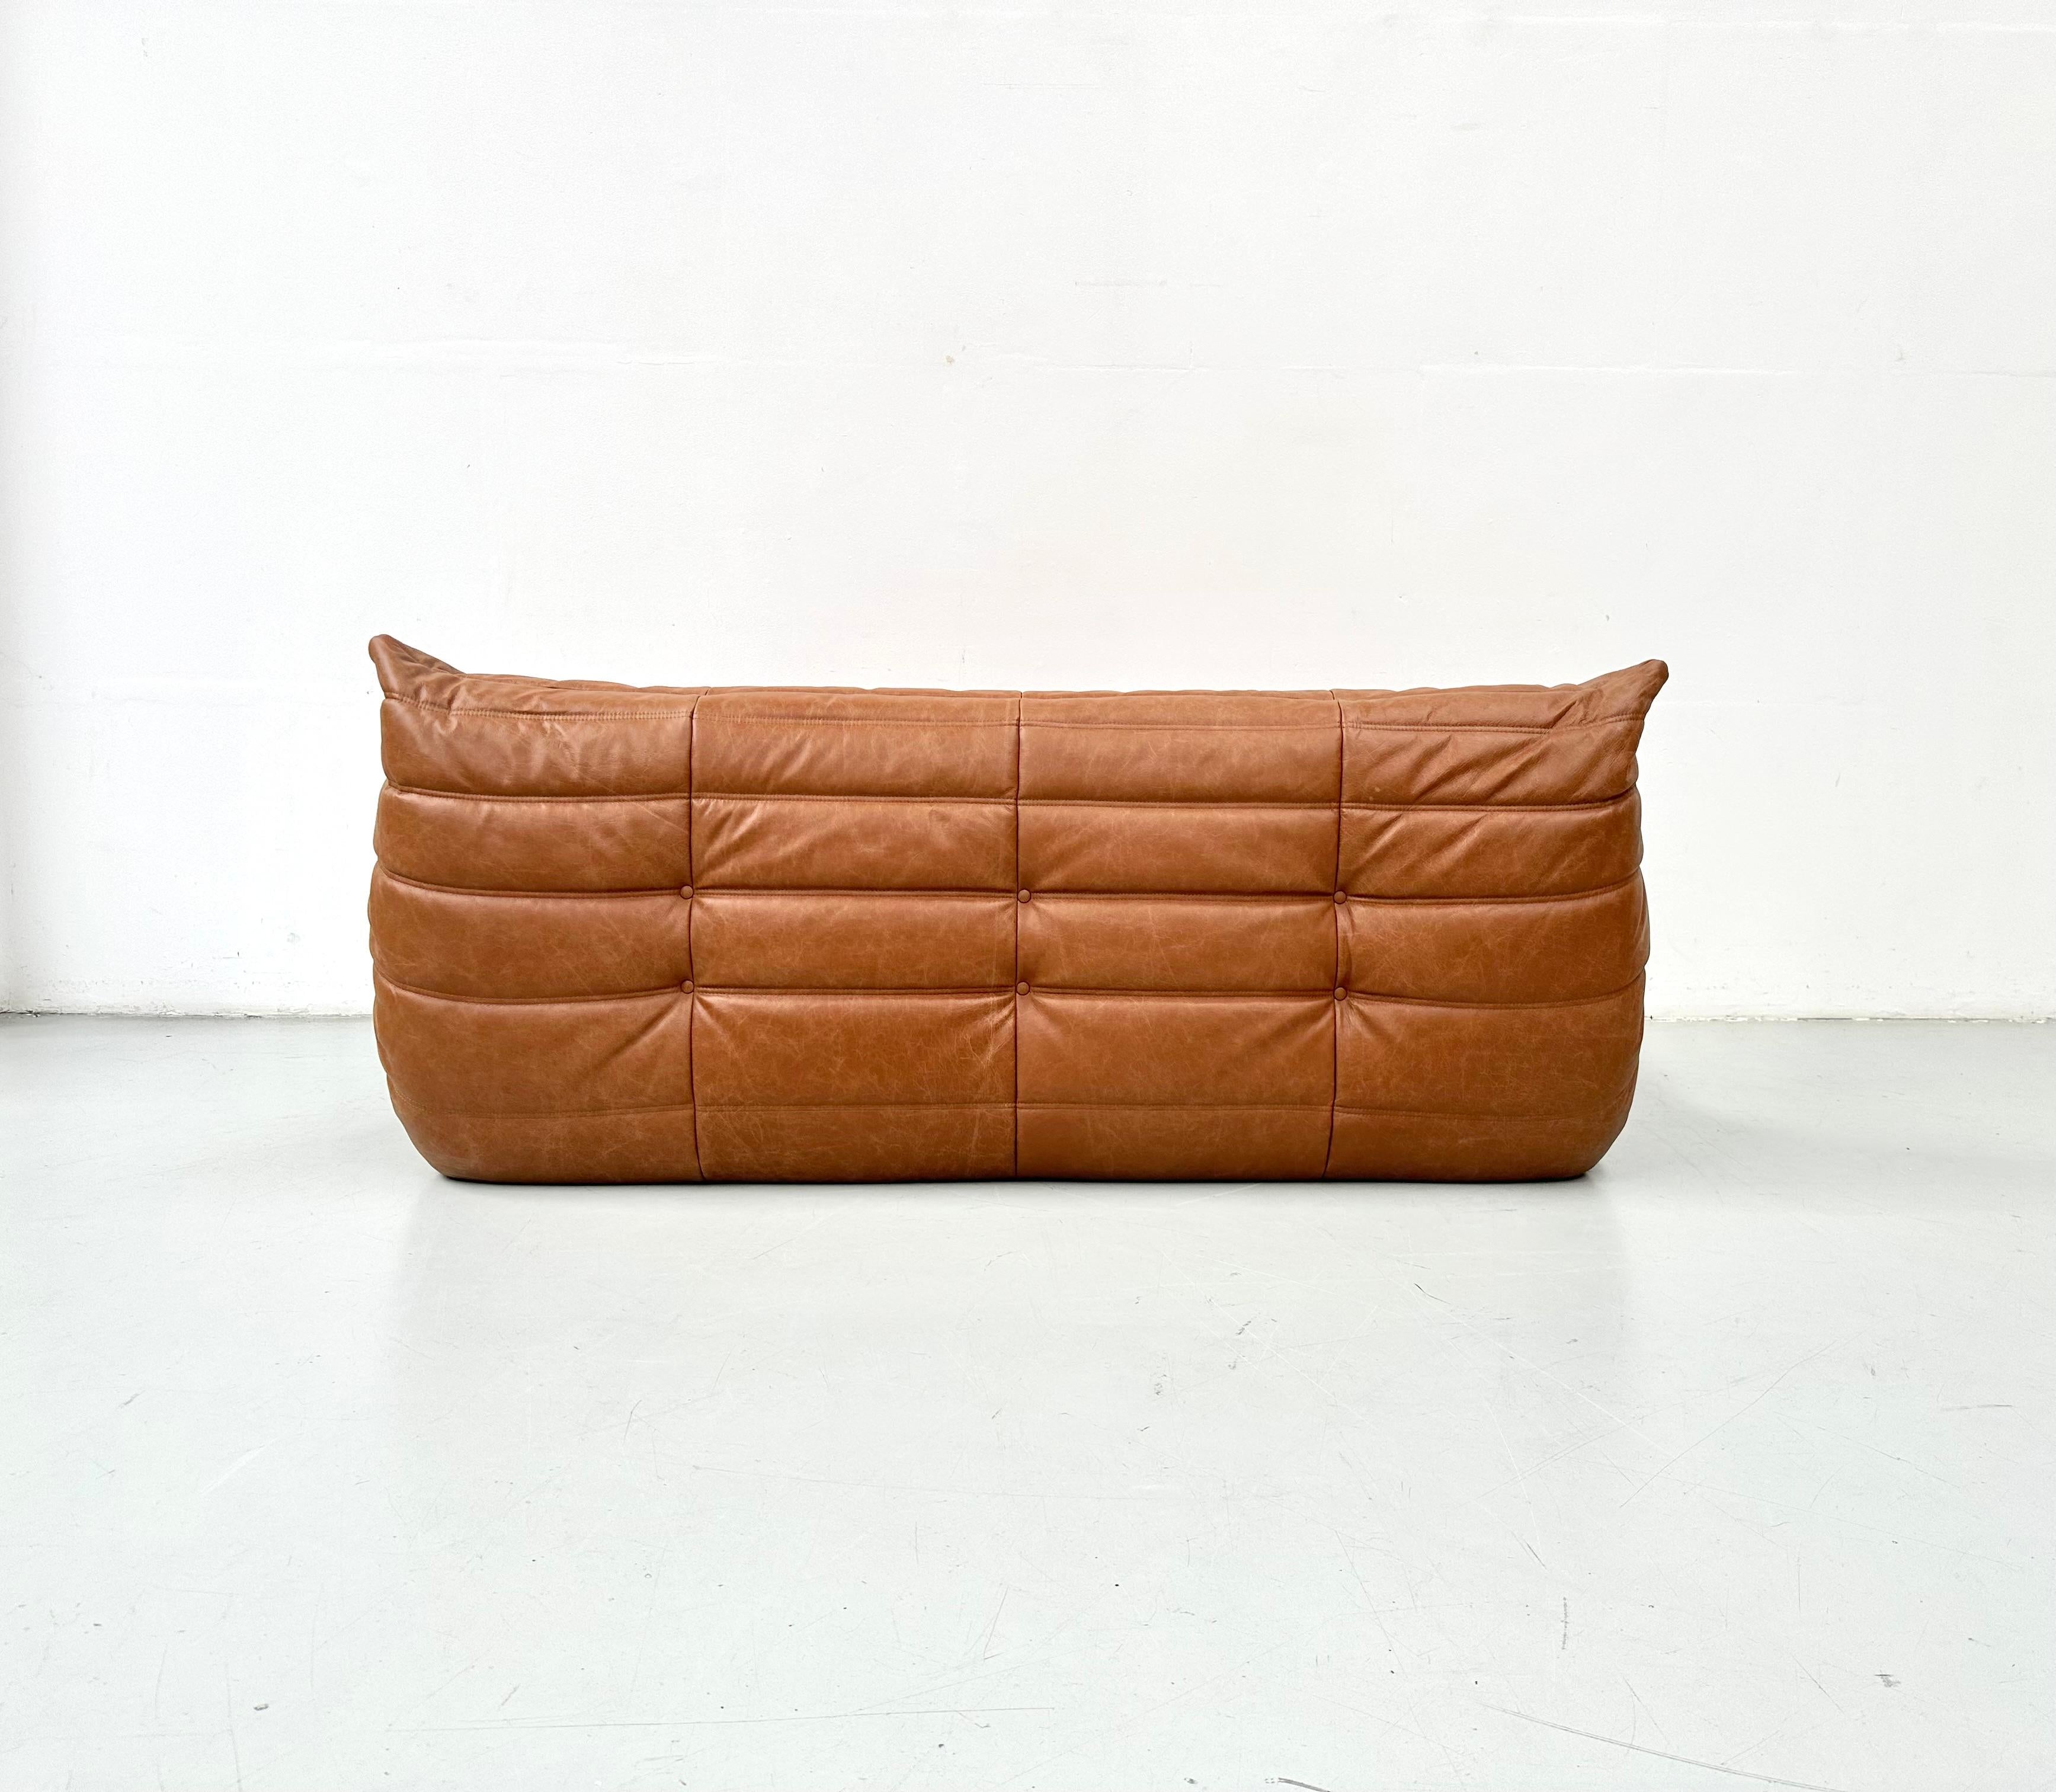 French Togo Sofa in Cognac  Leather by Michel Ducaroy for Ligne Roset. 5